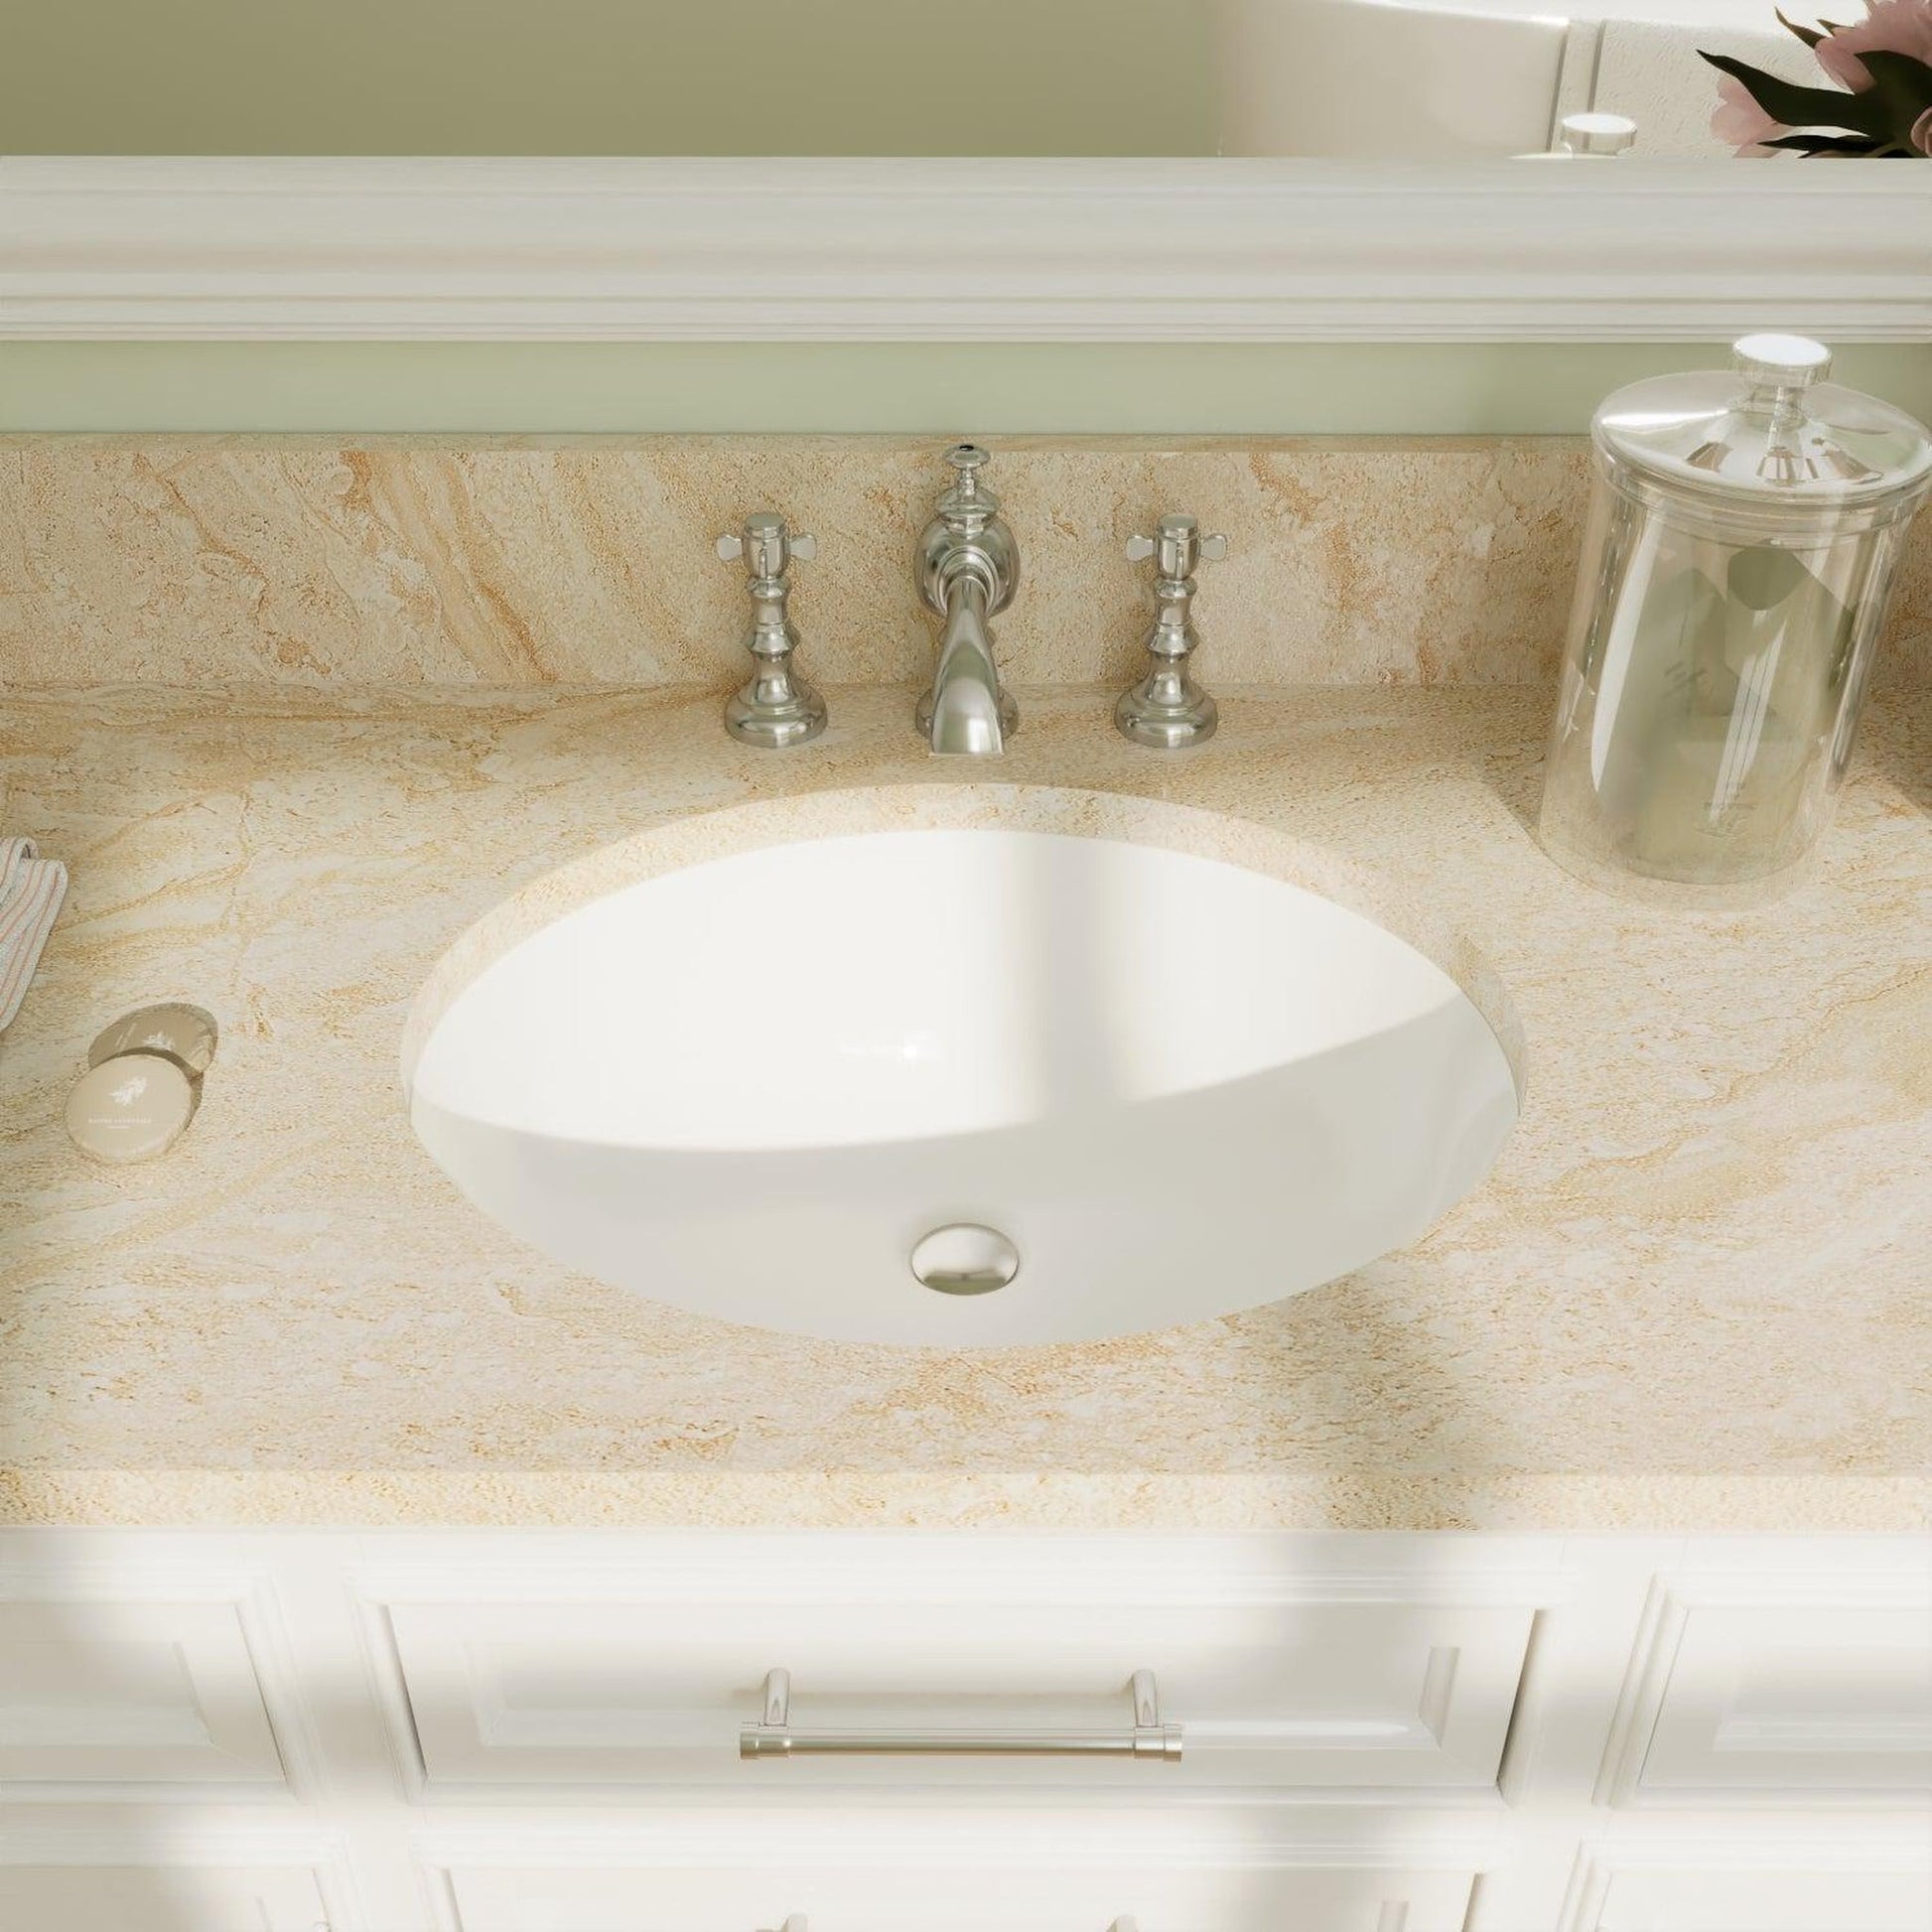 DeerValley Symmetry 18" x 15" Oval White Undermount Bathroom Sink With Overflow Hole